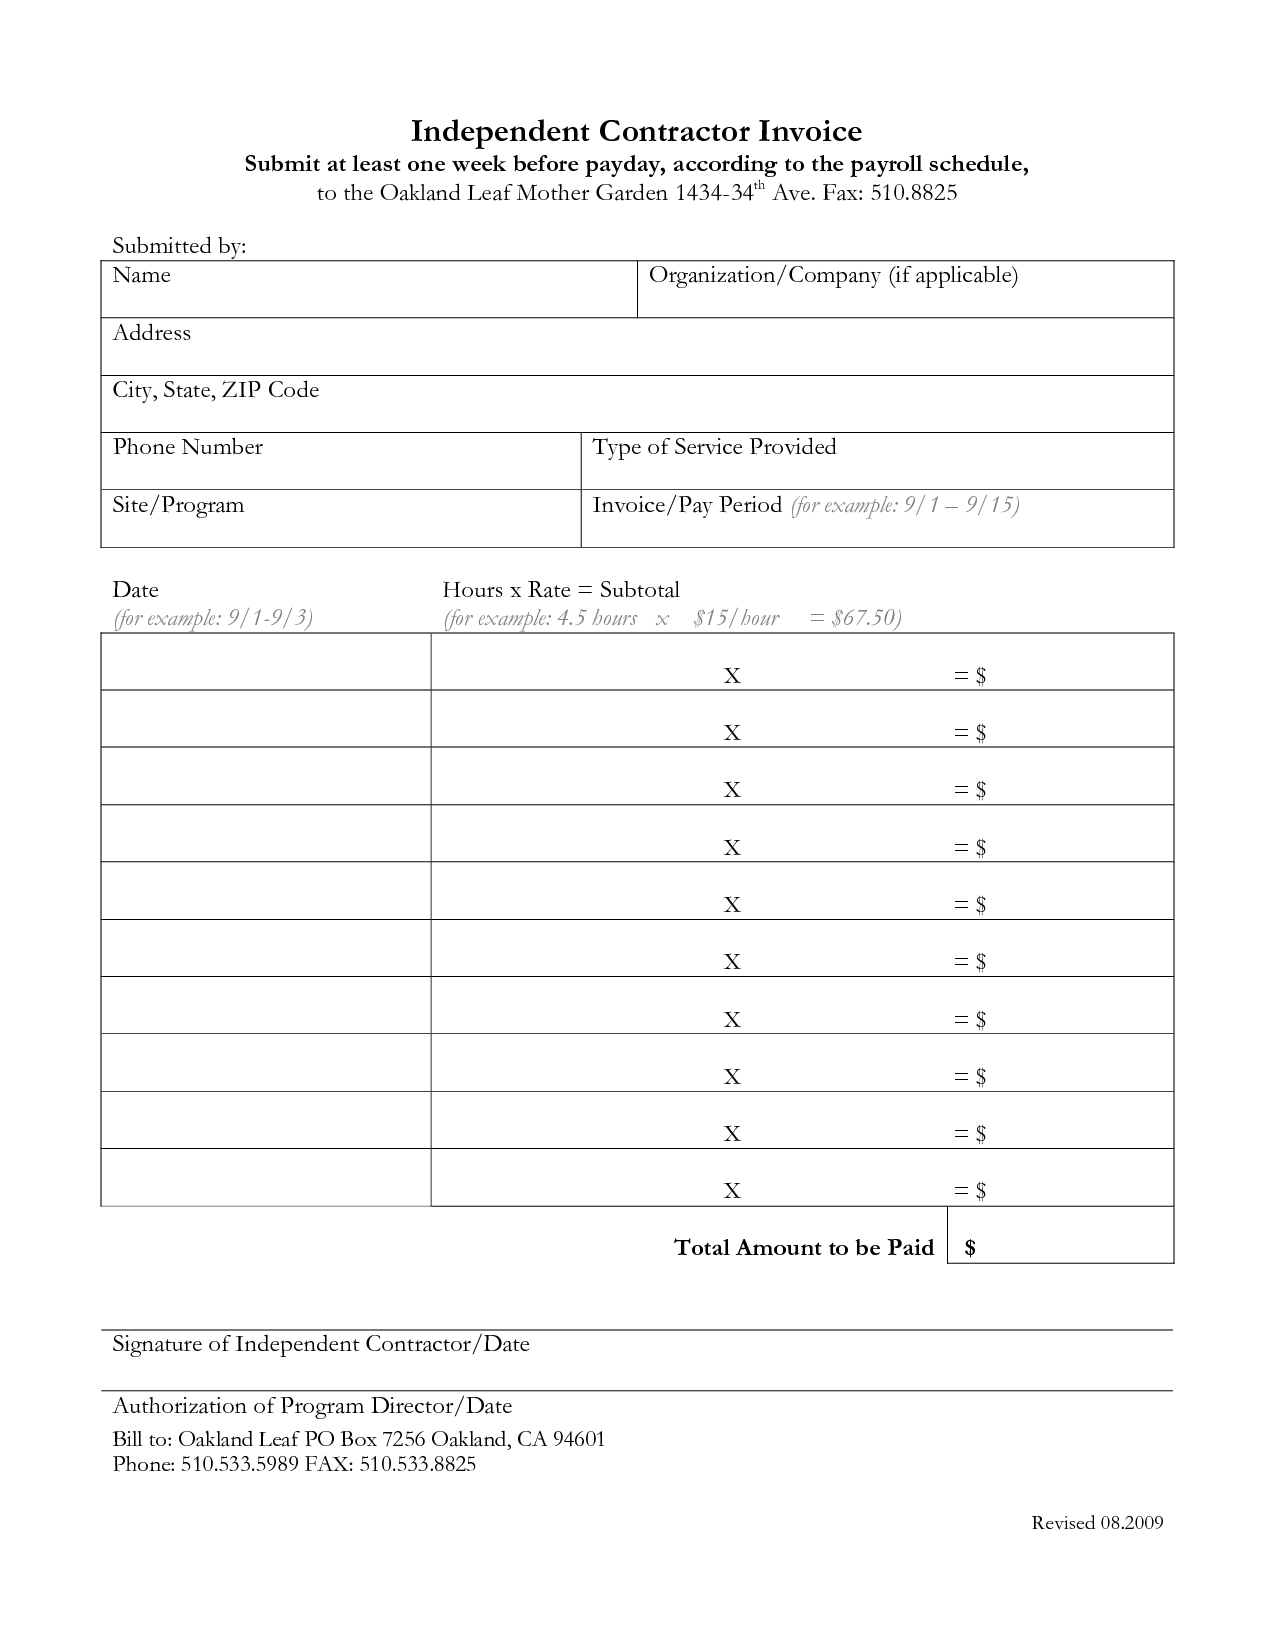 Independent Contractor Invoice Format Template Excel Free / Hsbcu